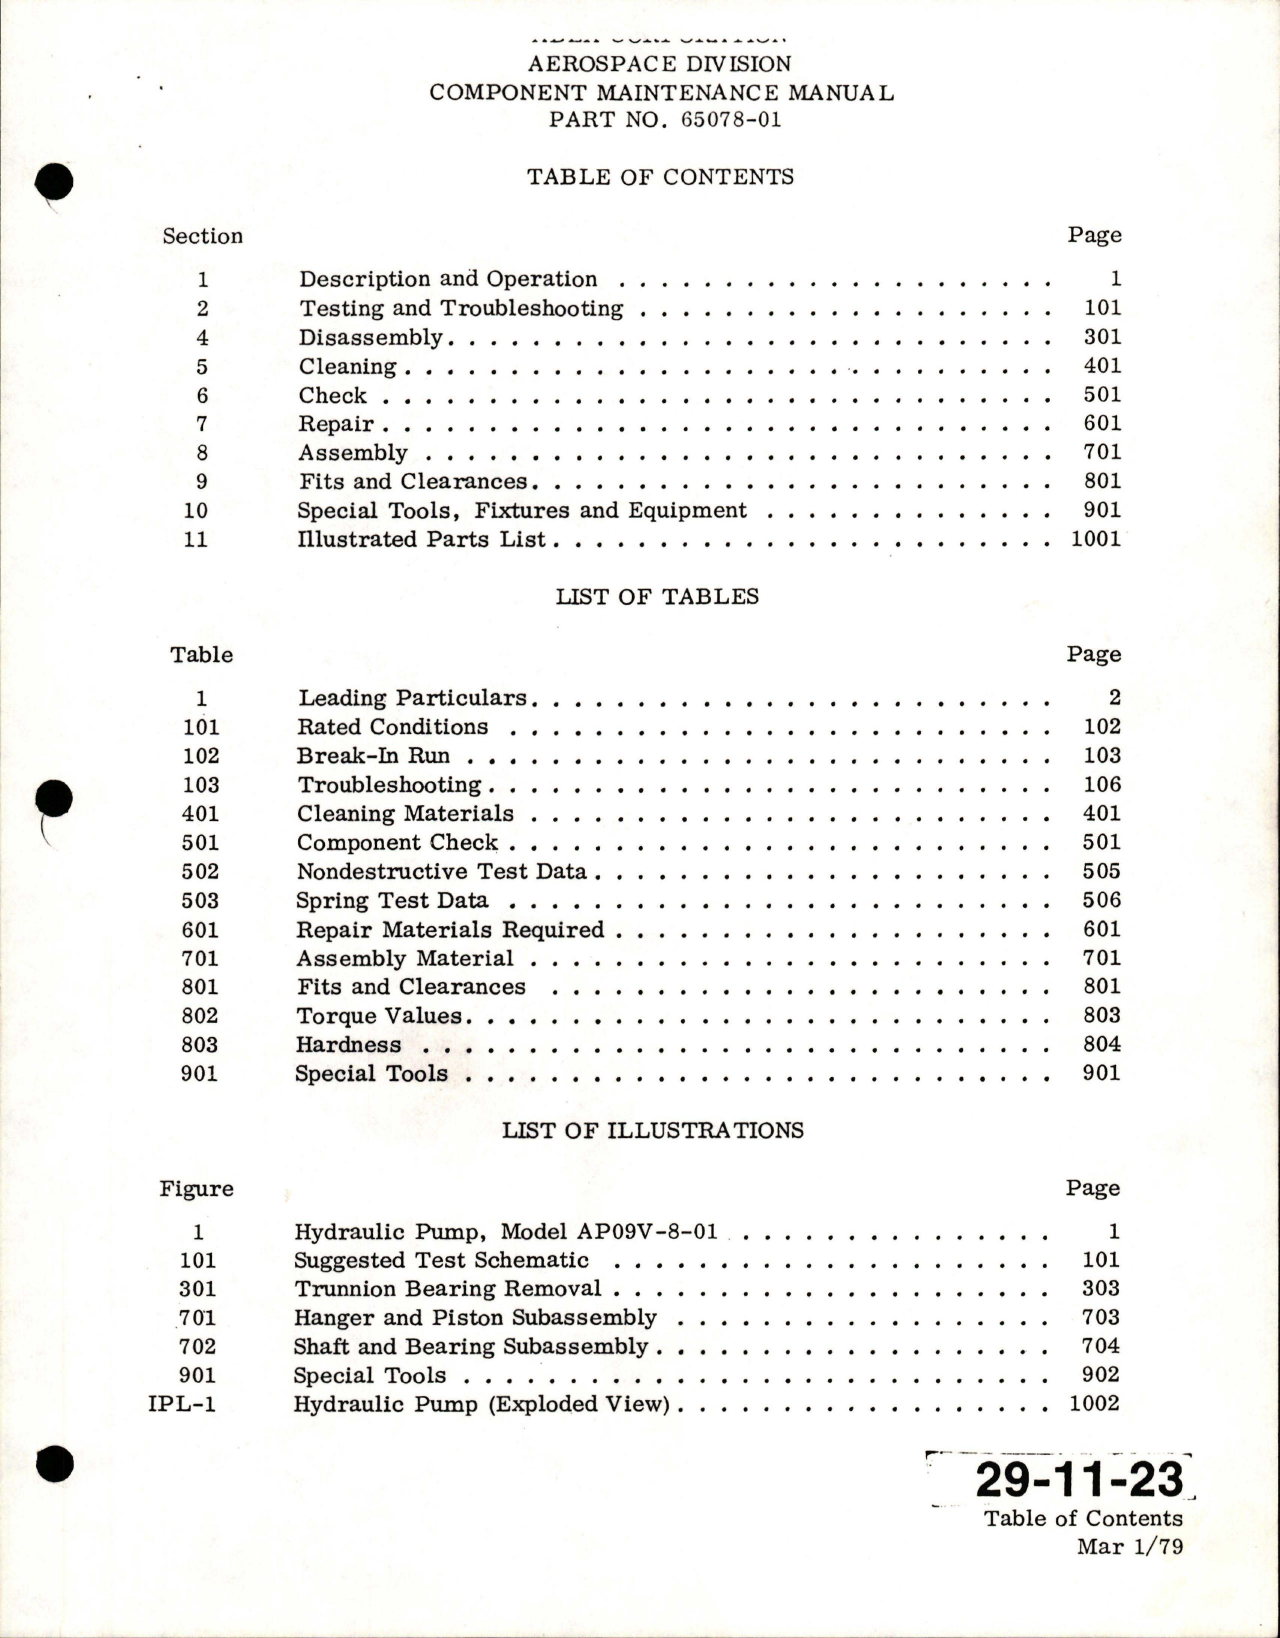 Sample page 5 from AirCorps Library document: Maintenance Manual with Illustrated Parts List for Variable Delivery Hydraulic Pump - Model AP09V-8-01 - Part 65078-01